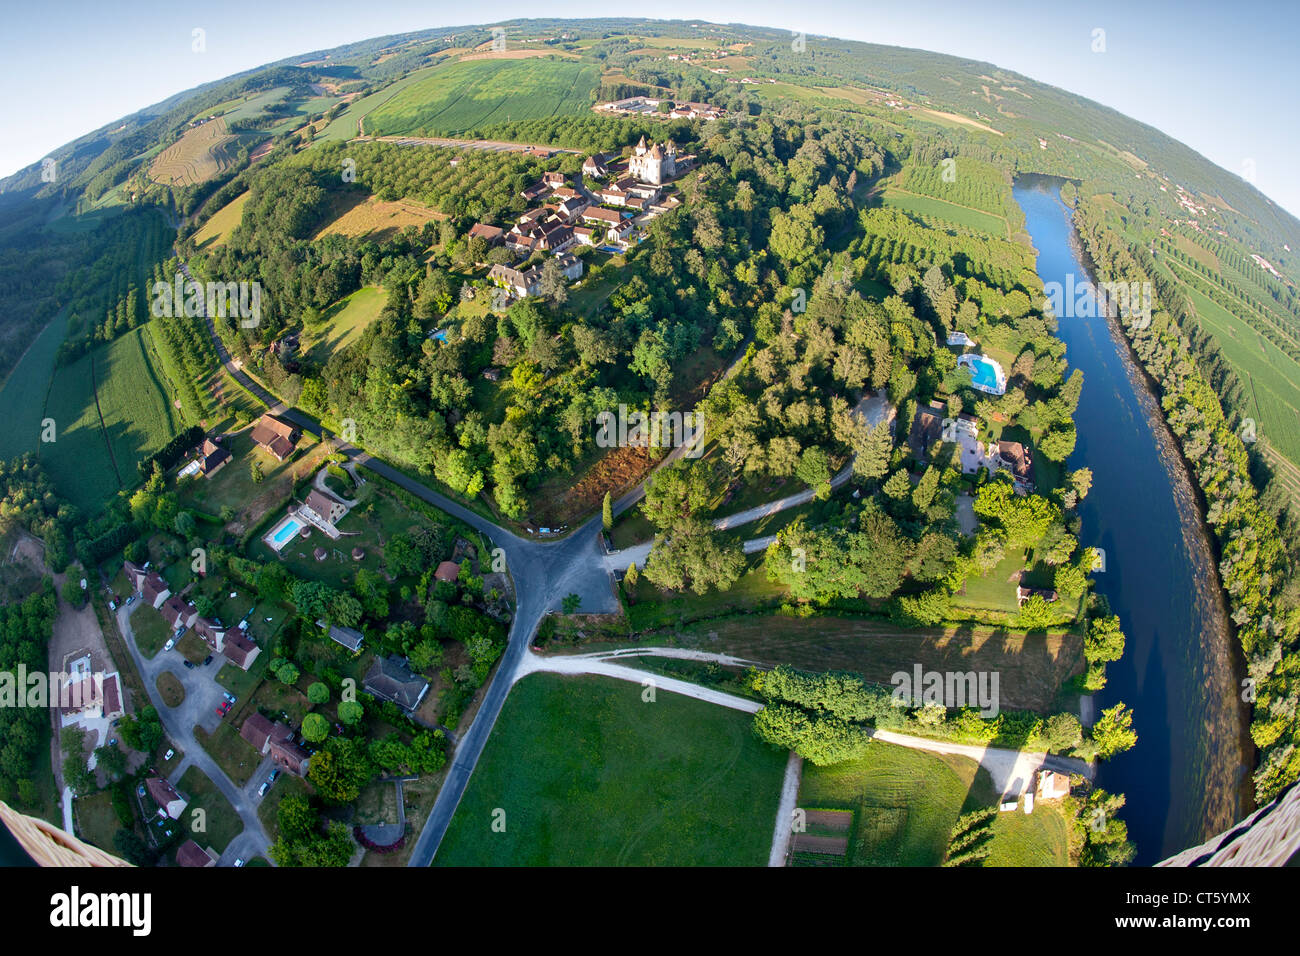 Aerial view of the Dordogne river and surrounding countryside near Sarlat in the Dordogne-Perigord region of south west France. Stock Photo